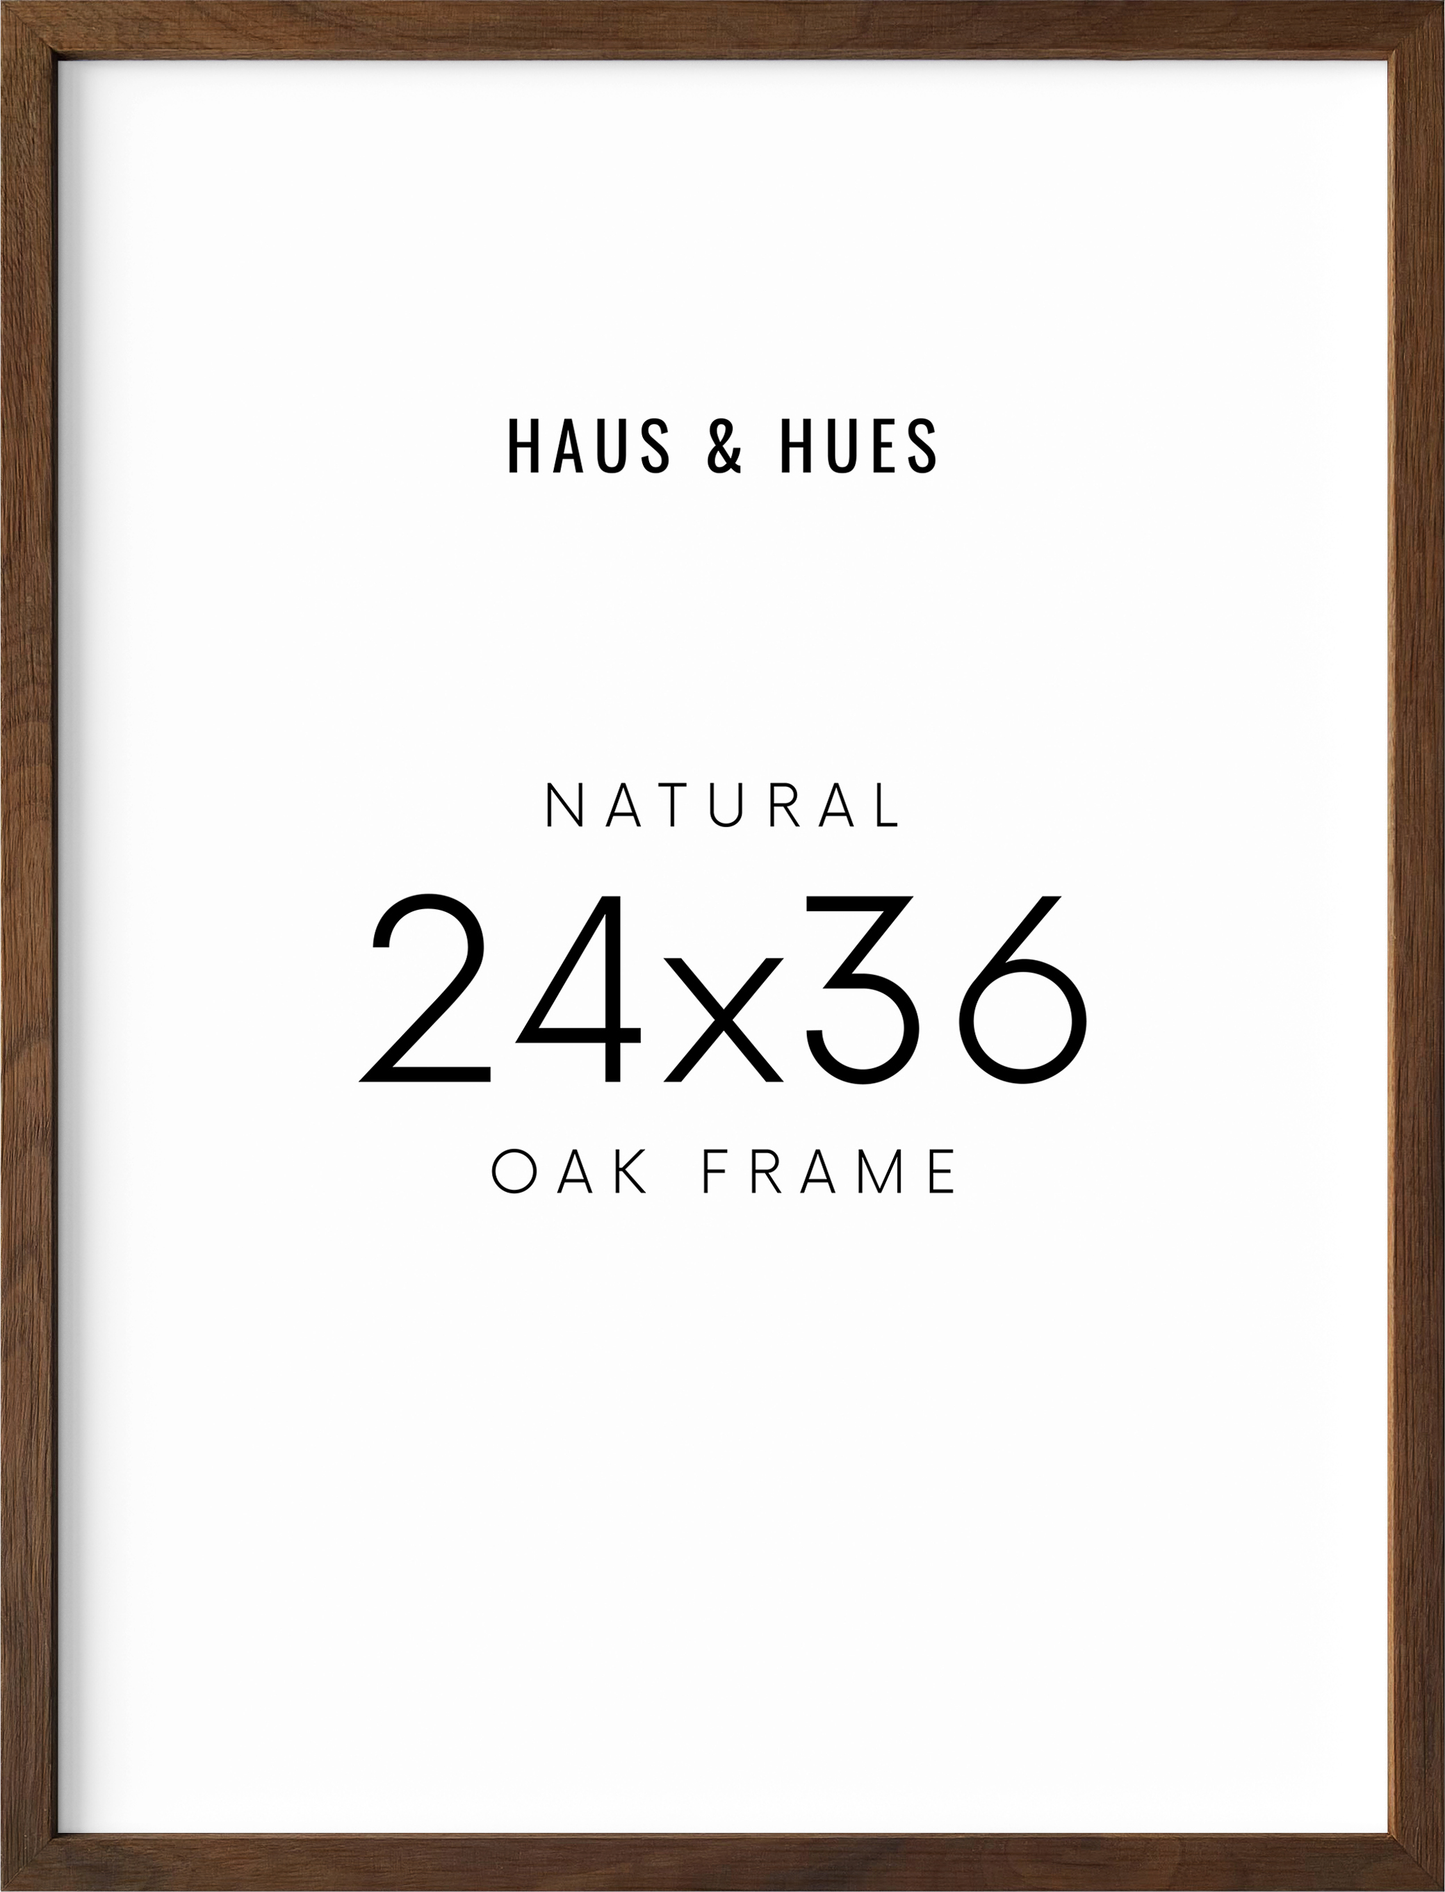 Haus and Hues 16x20 Frames Set of 3 - Walnut 16x20 Poster Frames